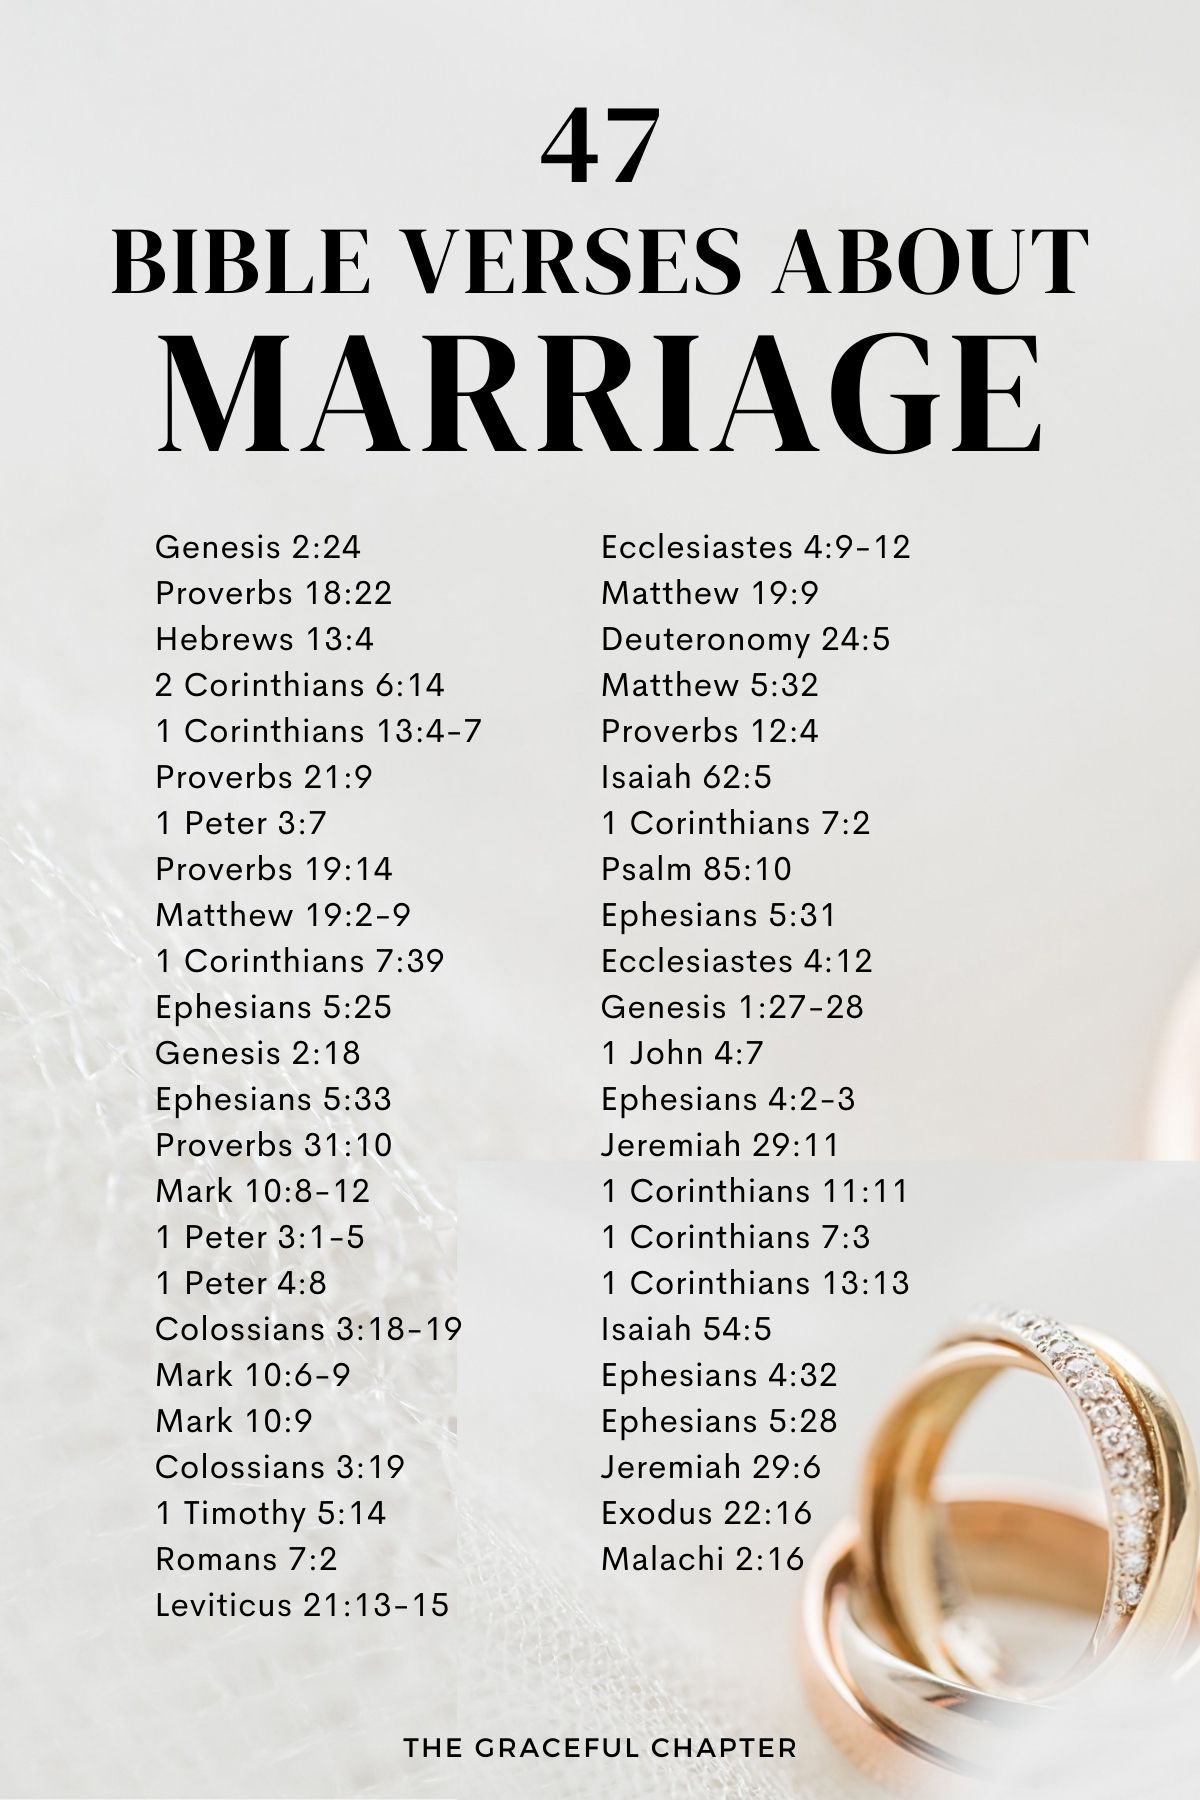 Bible verses about marriage